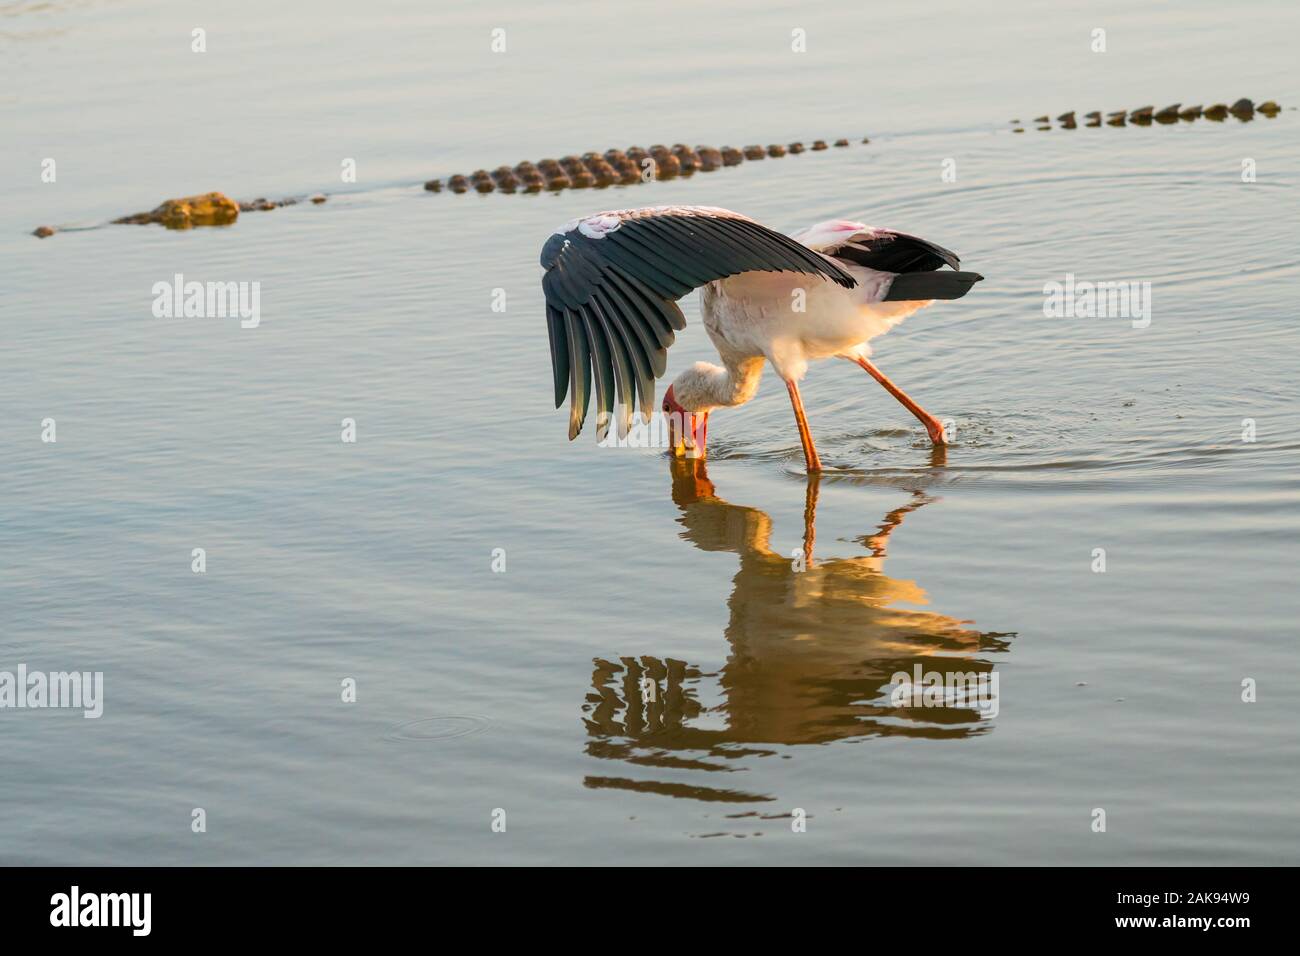 yellow billed stork,wood stork,wood ibis (Mycteria ibis) wading in shallow water with one wing spread out or open as a crocodile floats past at Kruger Stock Photo